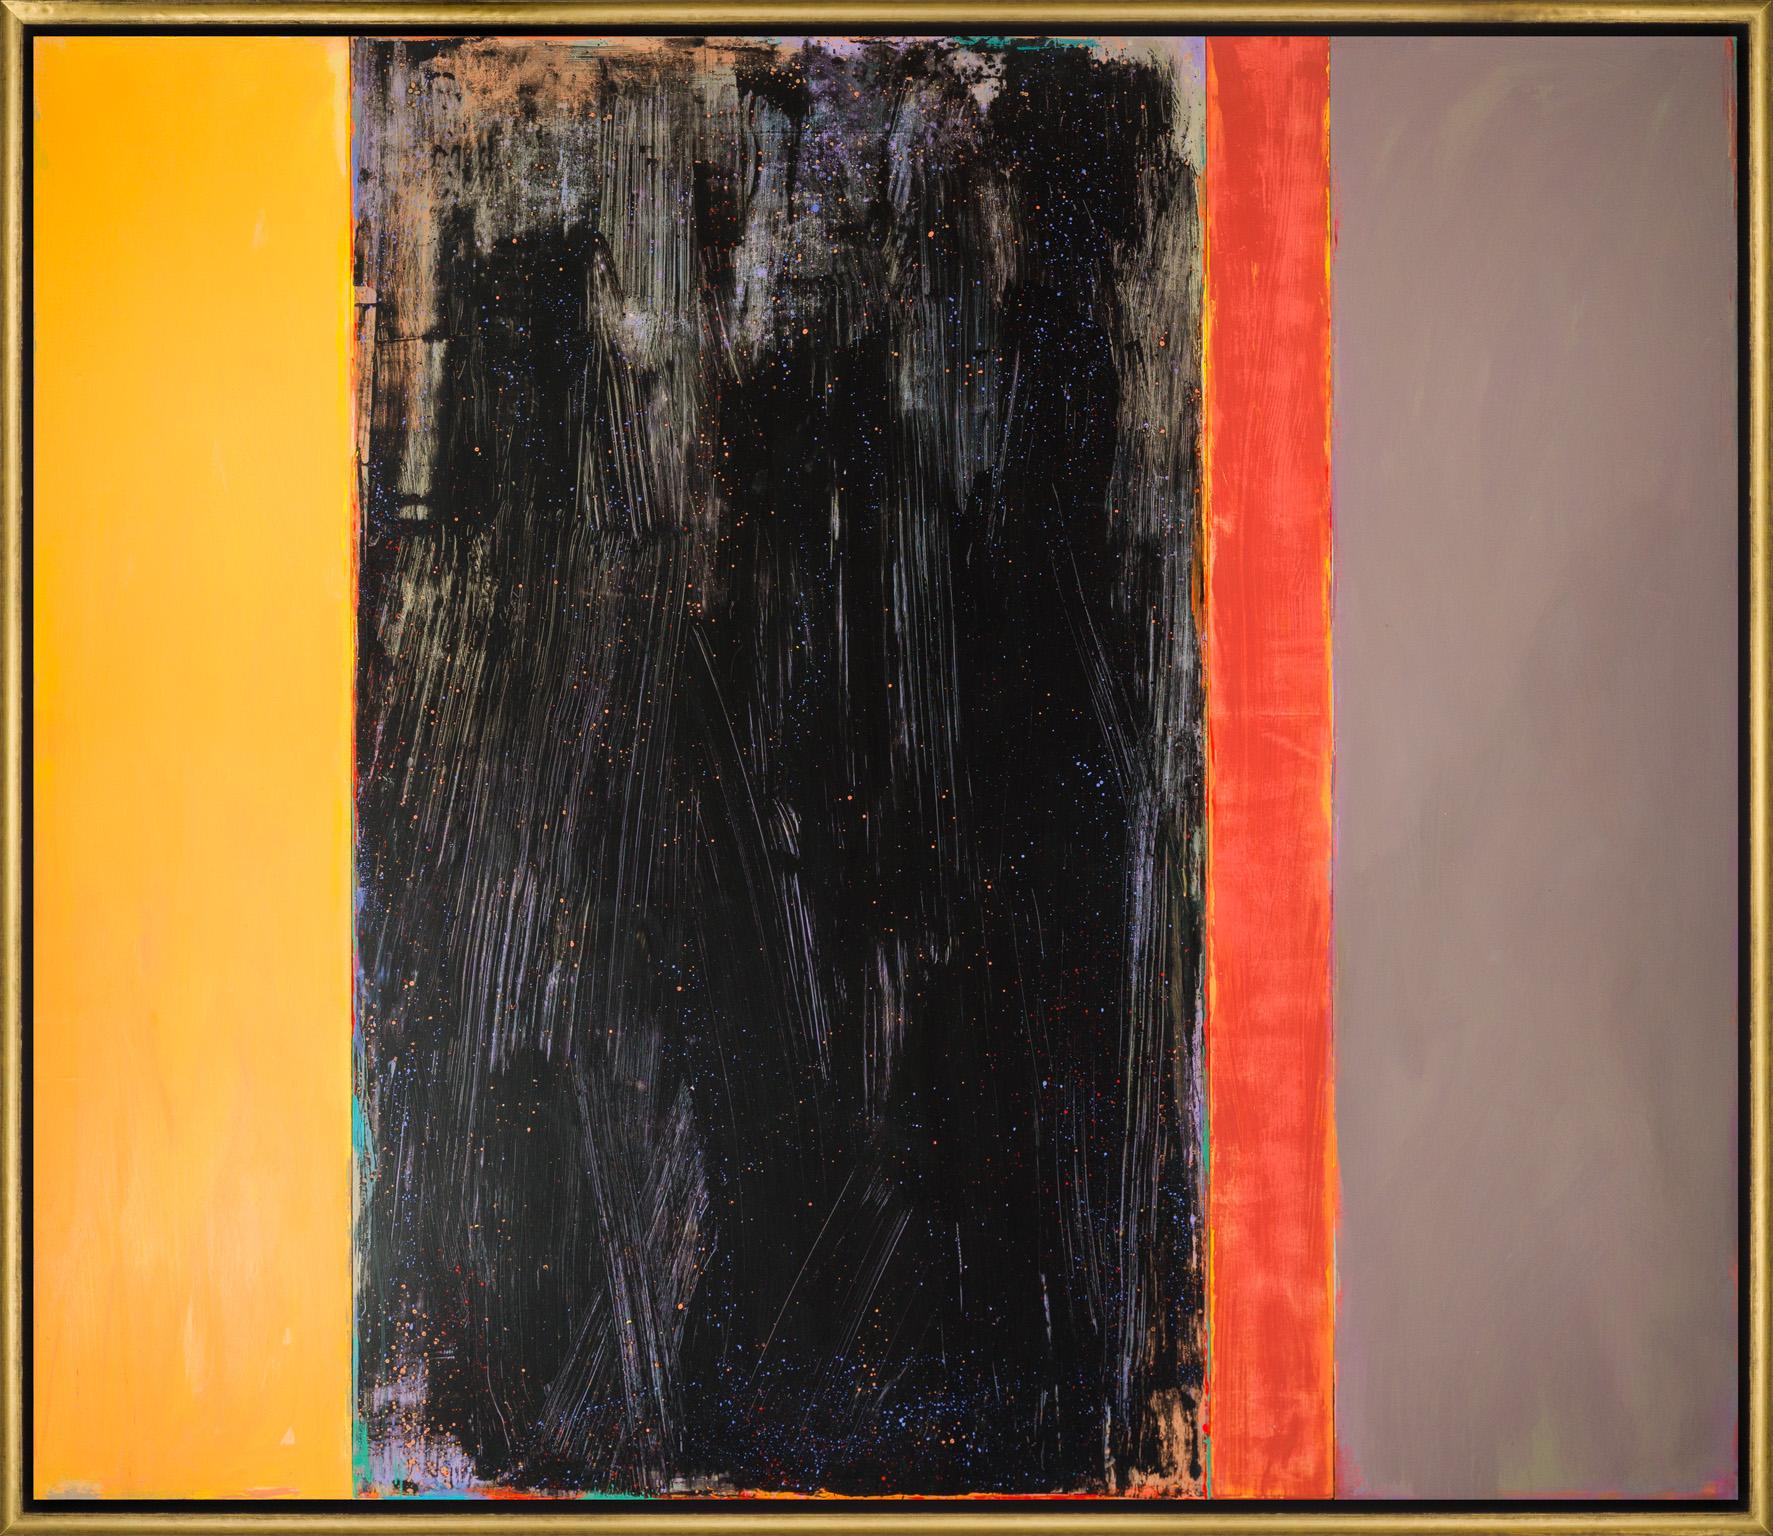 David Rothermel Abstract Painting - "Exponent" Acrylic Painting on Panels with Warm Colors and Texture